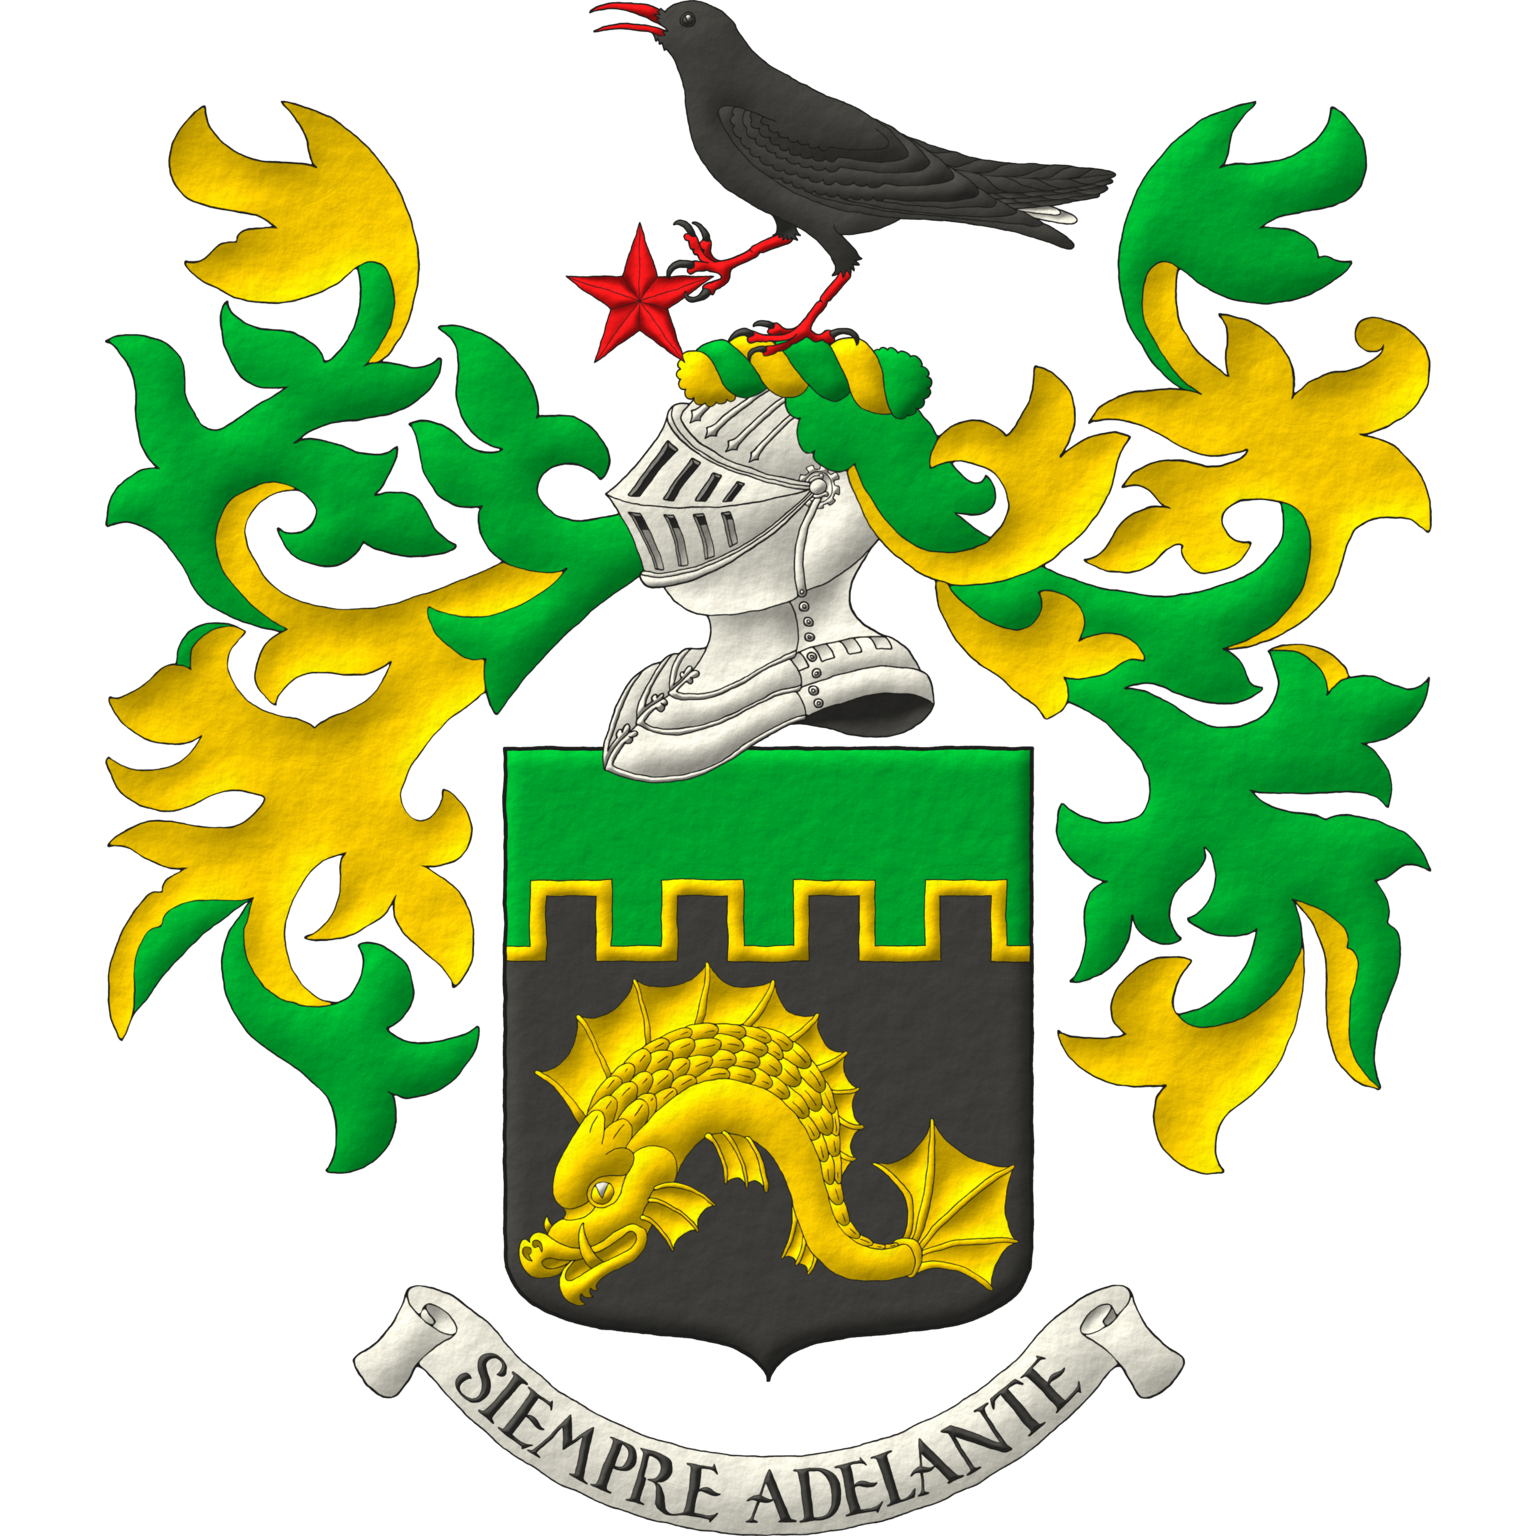 Sable, a dolphin naiant Or; a chief embattled Vert, fimbriated Or. Crest: Upon a helm with a wreath Or and Vert, a cornish chough speaking proper, his dexter foot grasping the point of a mullet Gules. Mantling: Vert doubled Or. Motto: «Siempre Adelante».